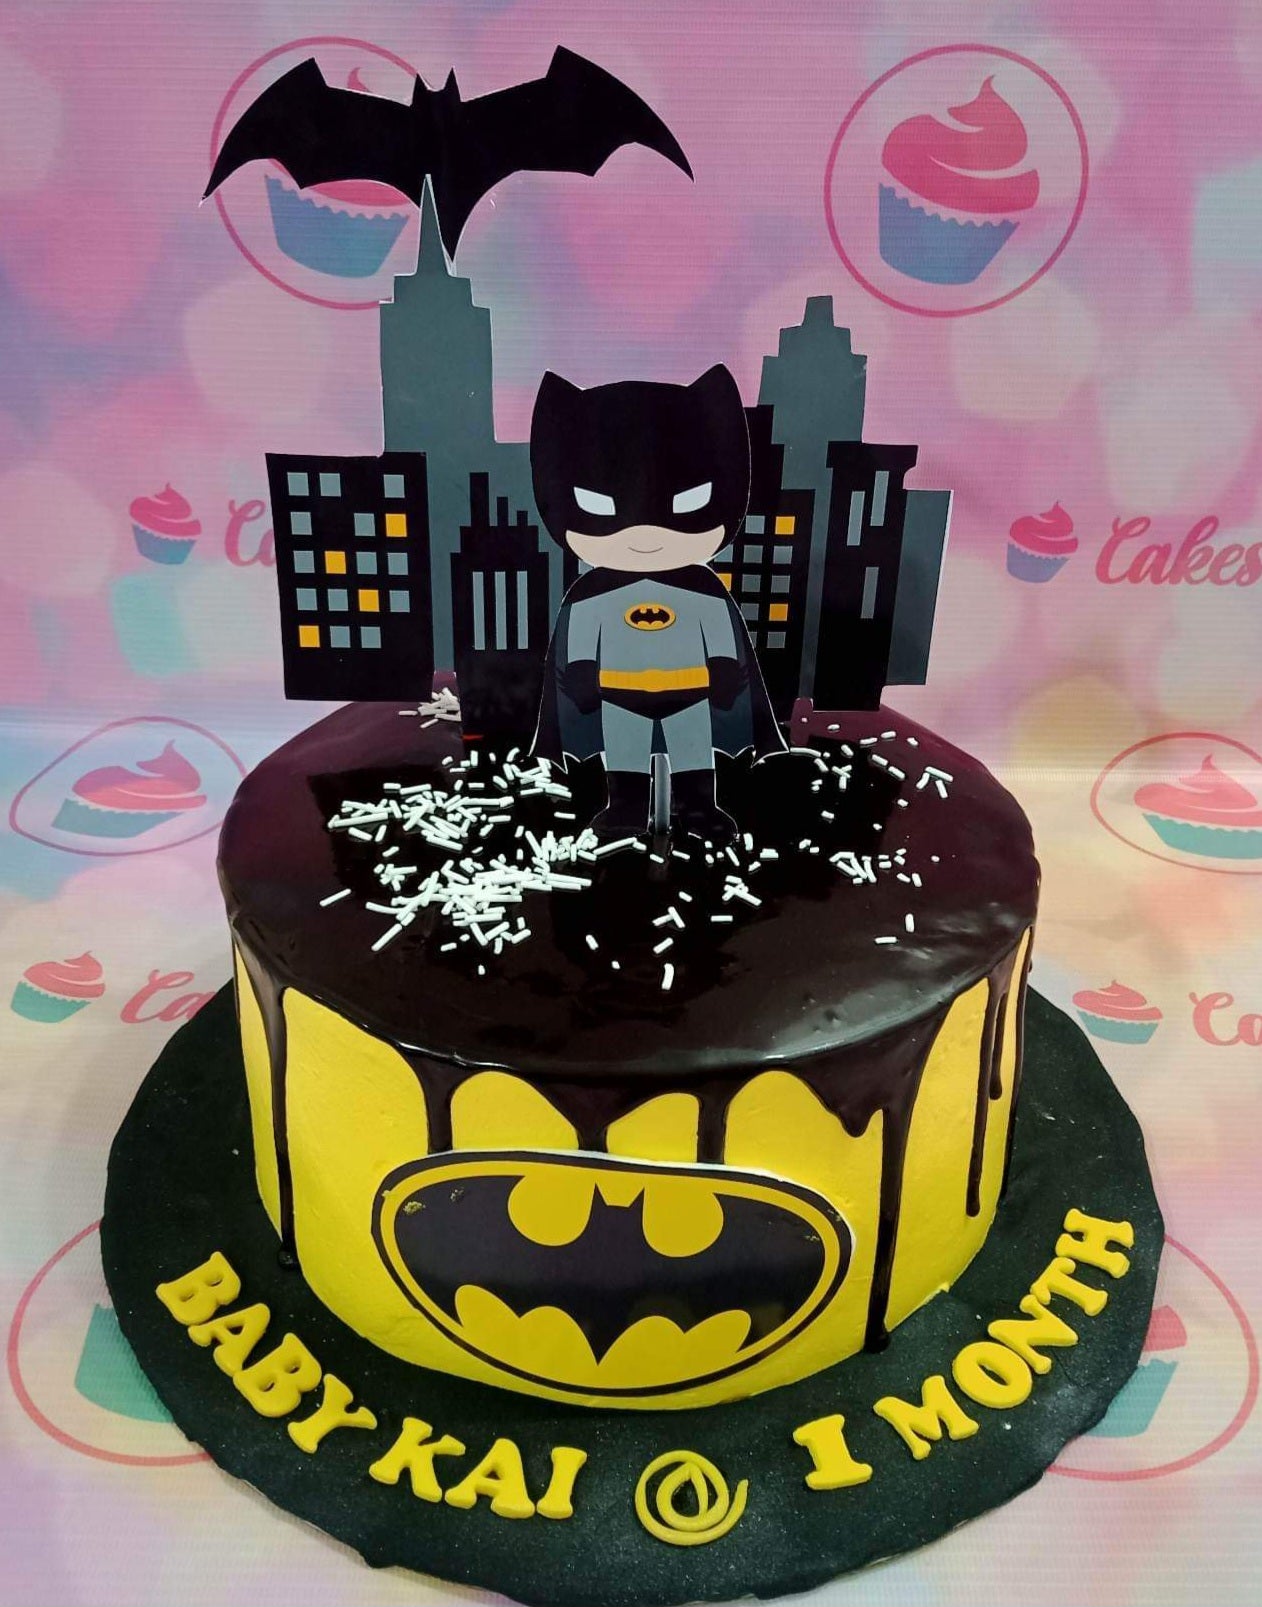 Batman Cake - Order onine and have it delivered to your doorstep